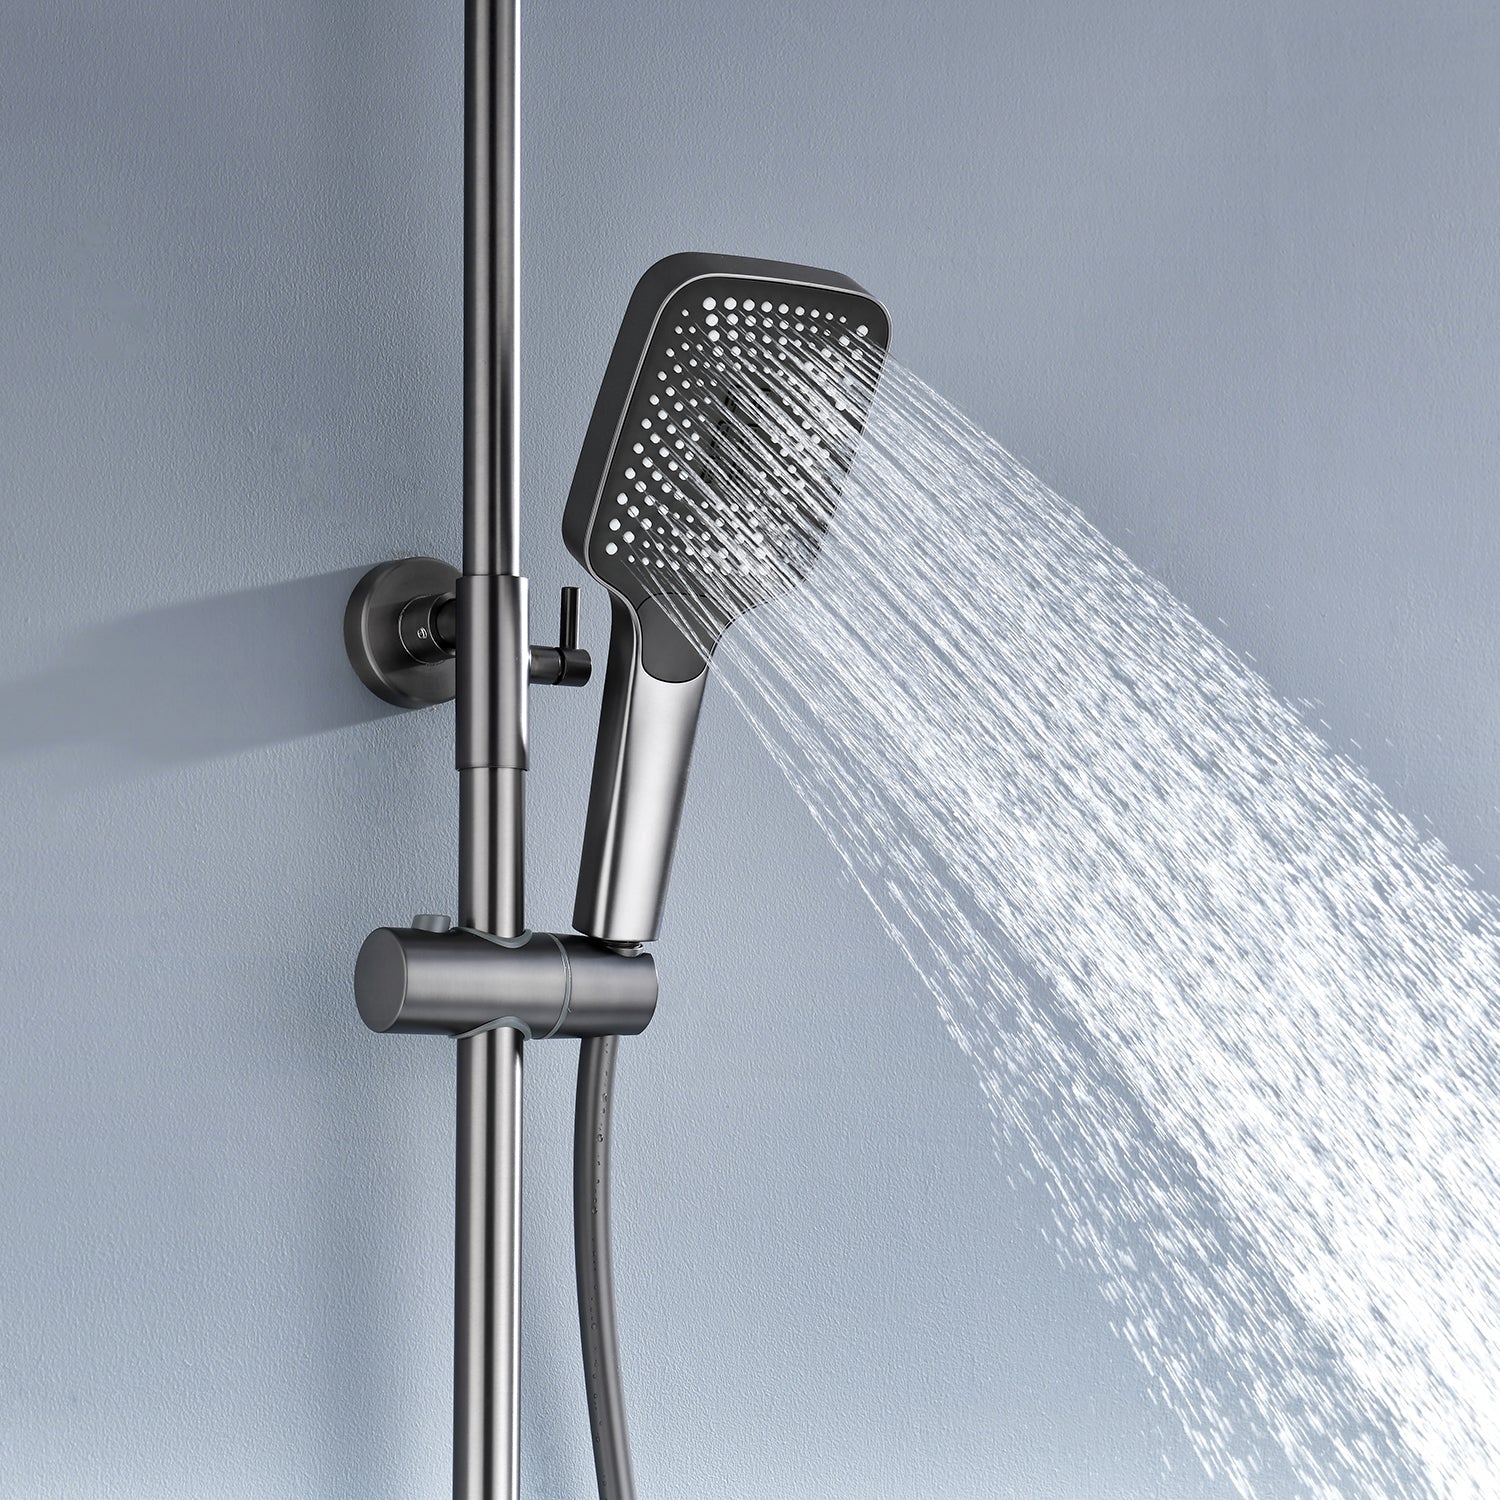 Lefton Piano Key Design Shower System with Temperature Display